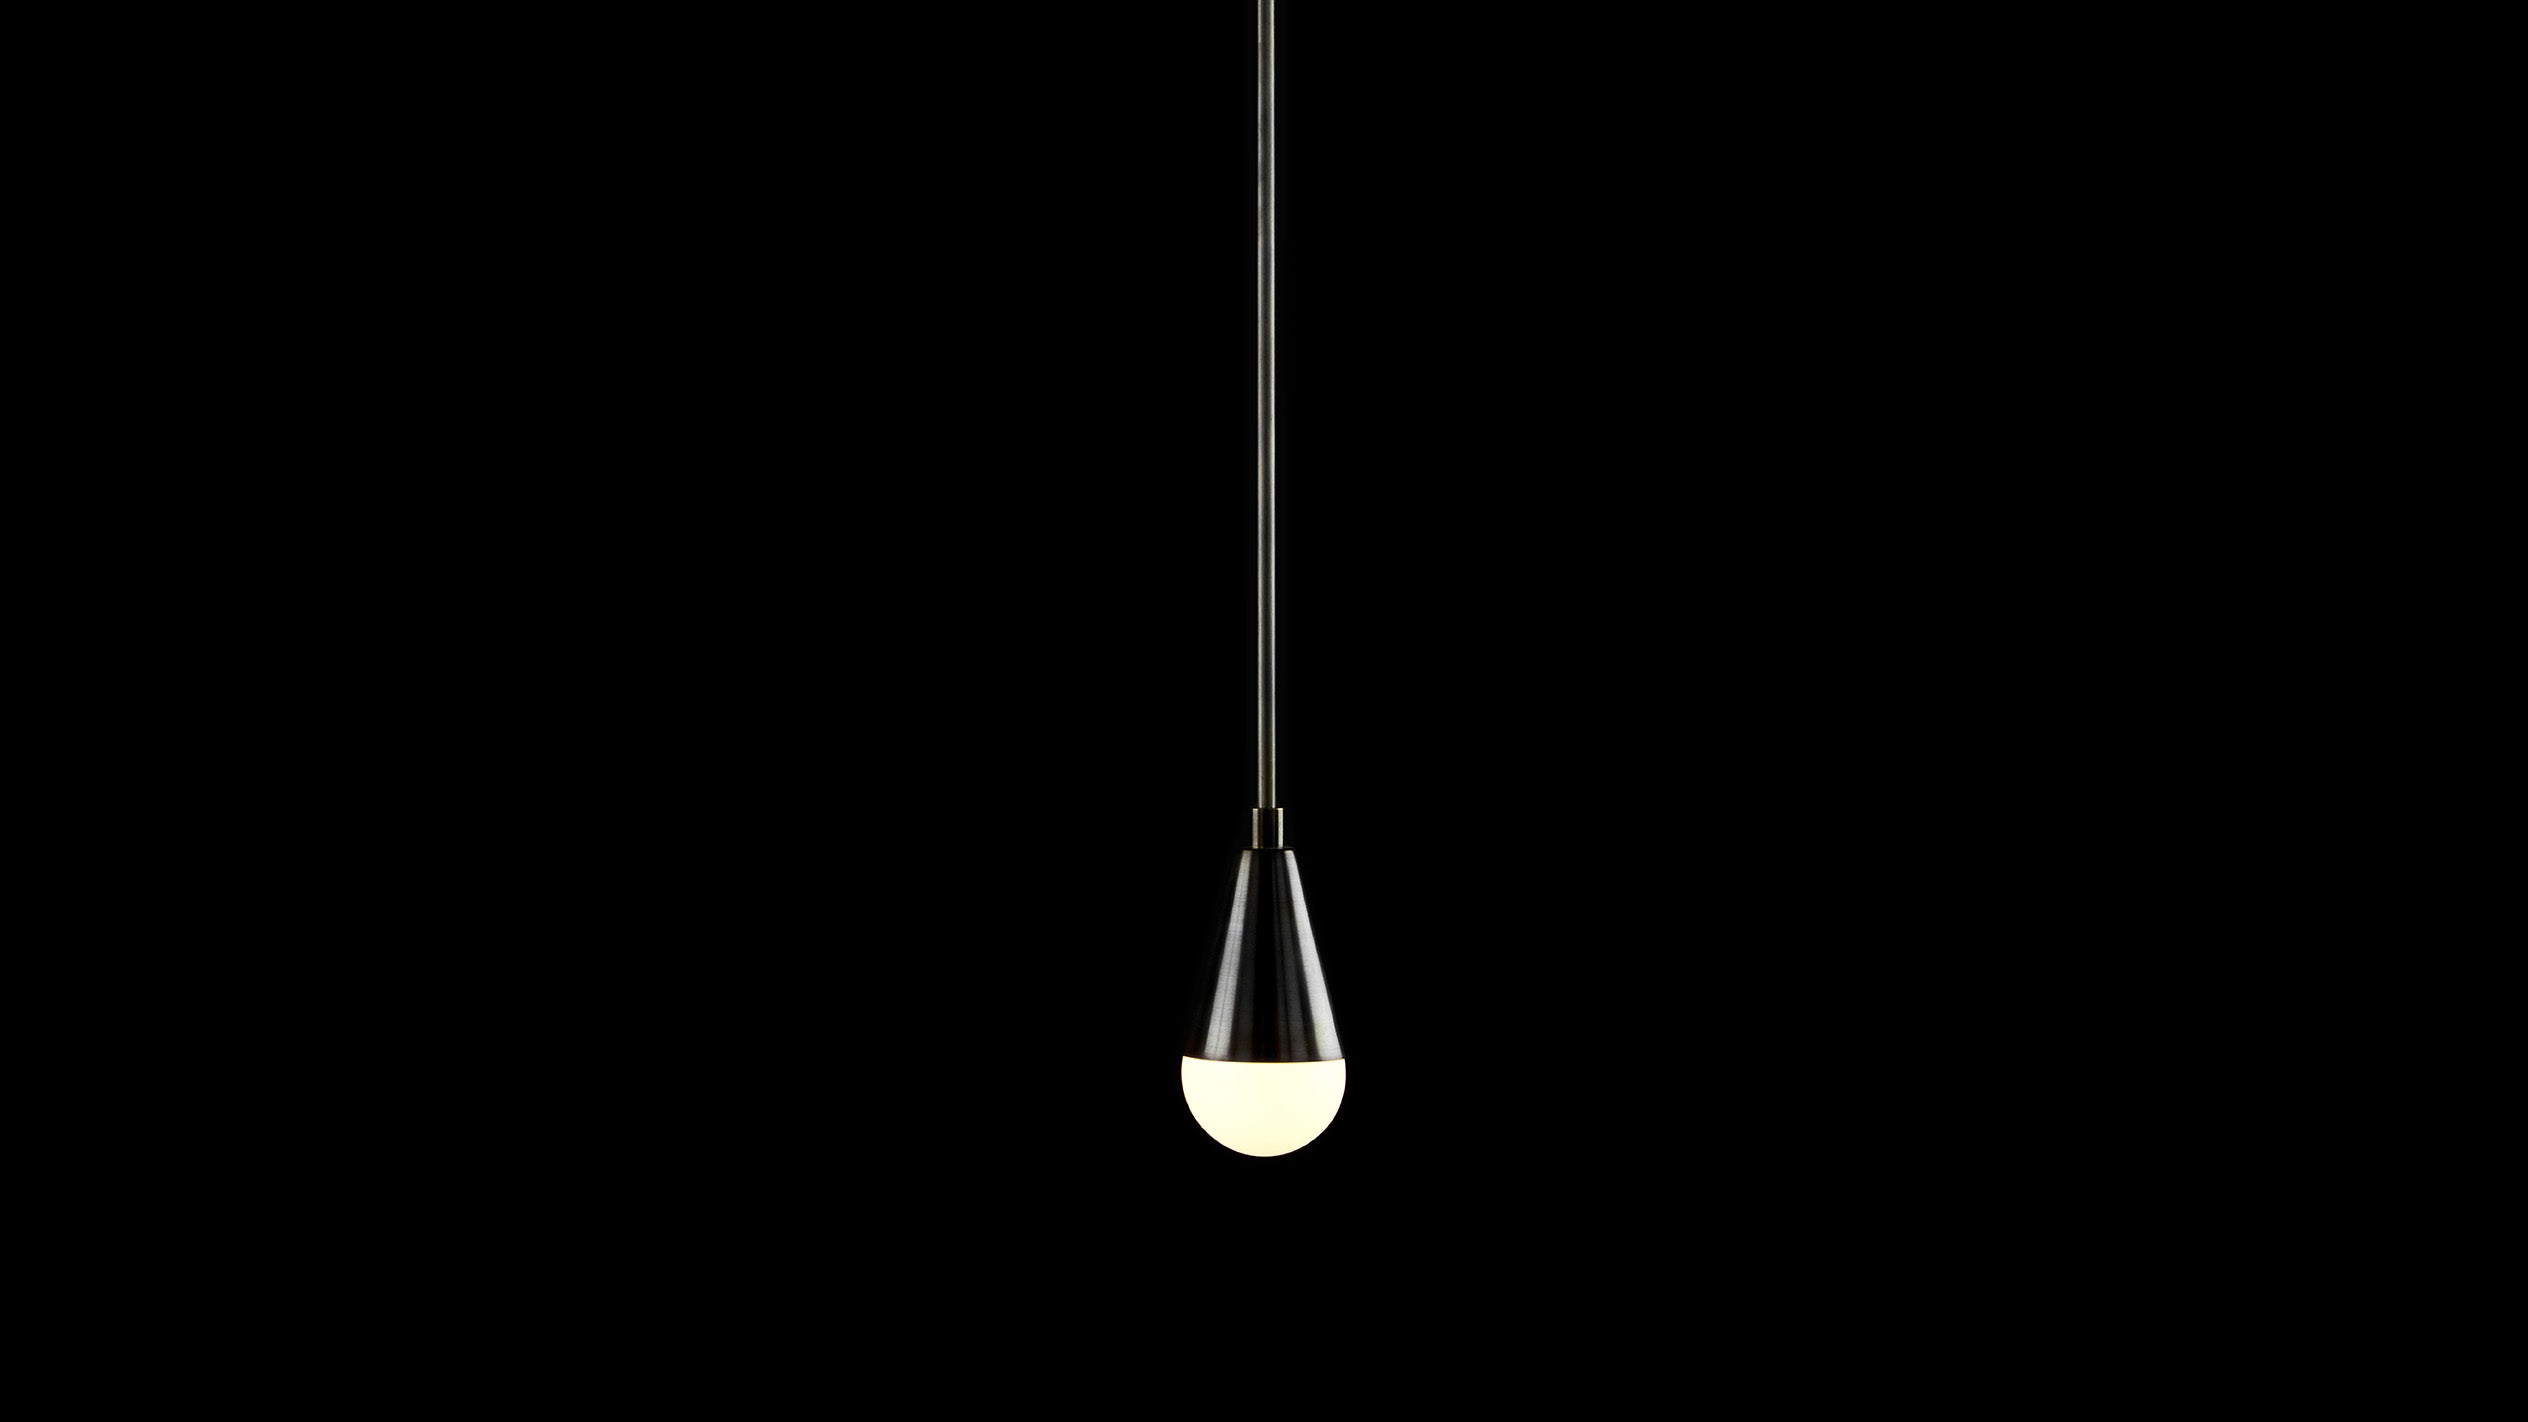 TRIAD : 1 ceiling pendant in Blackened Brass finish, against a black background. 